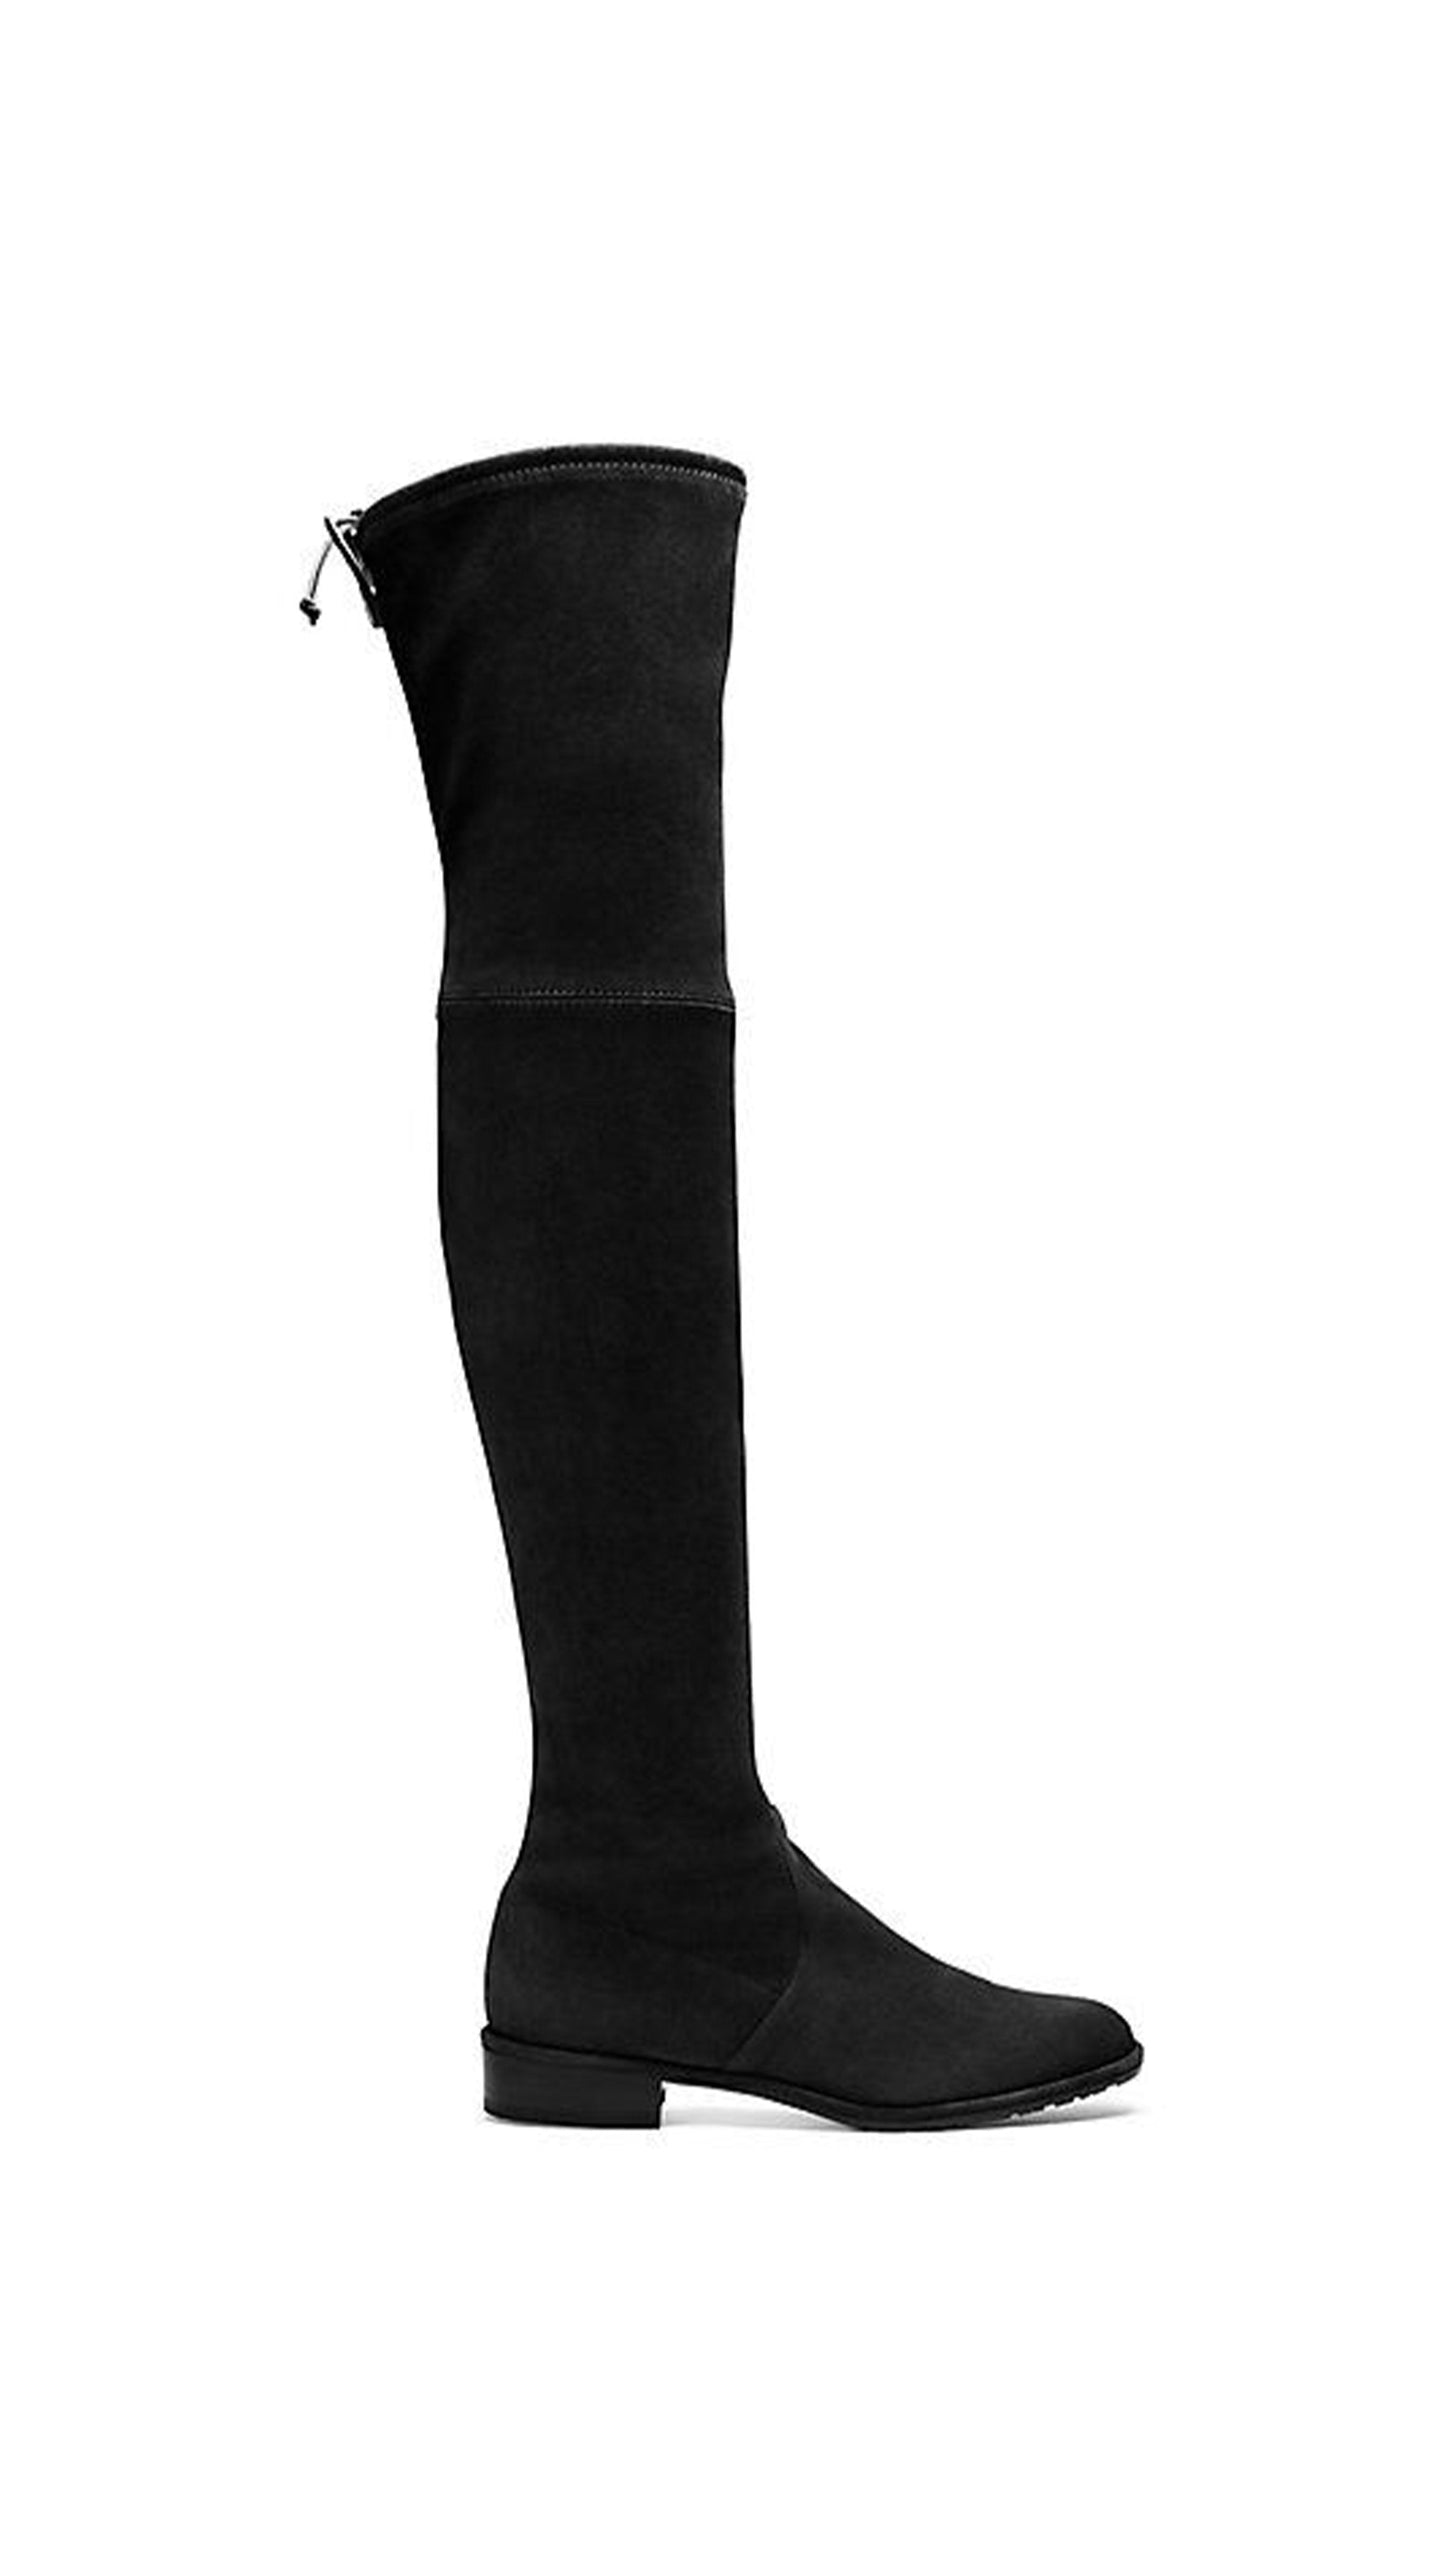 Lowland Suede Over-The-Knee Boots - Black